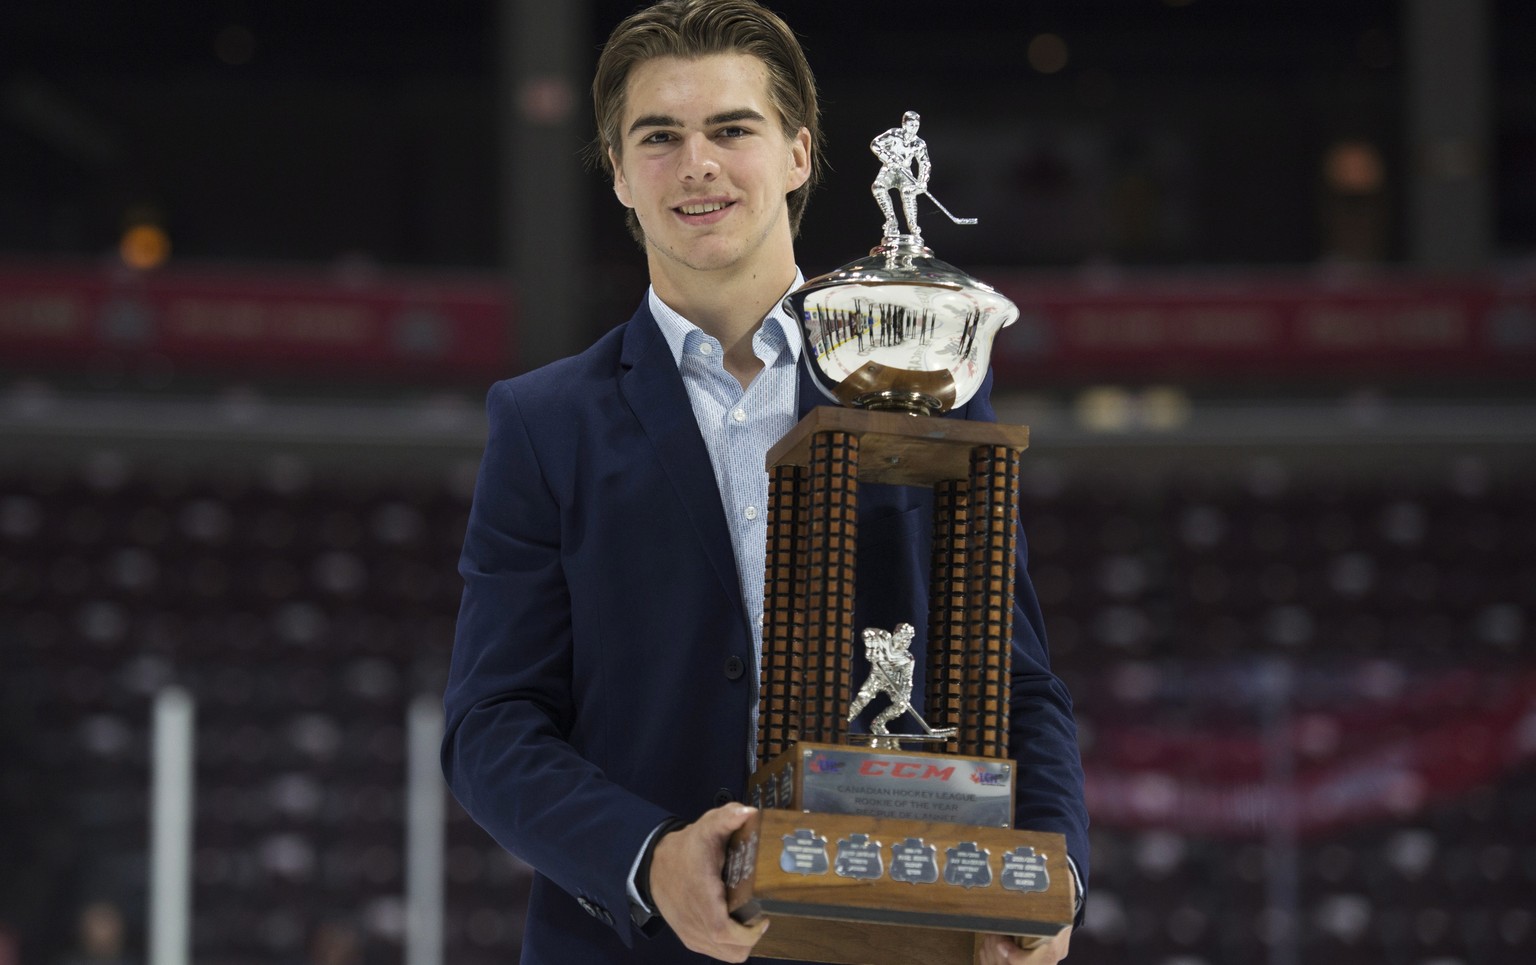 CHL Rookie of the Year Award recipient Nico Hischier, from the Halifax Mooseheads, holds his trophy following a media availability at the Memorial Cup Saturday, May 27, 2017, in Windsor, Ontario. (Adr ...